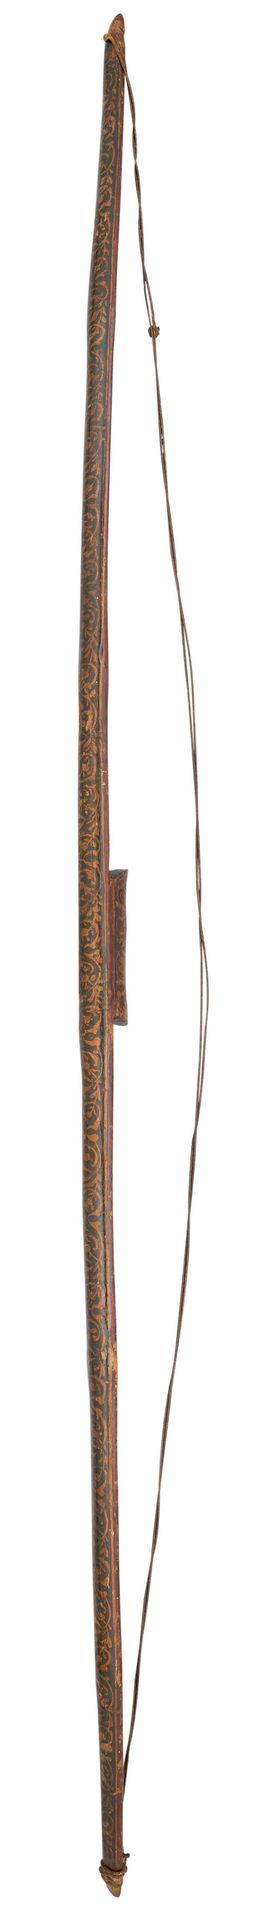 A SOUTH INDIAN DECORATED BOW, 18TH/19TH CENTURY, PROBABLY KARNATAKA ARCO DECORAT&hellip;